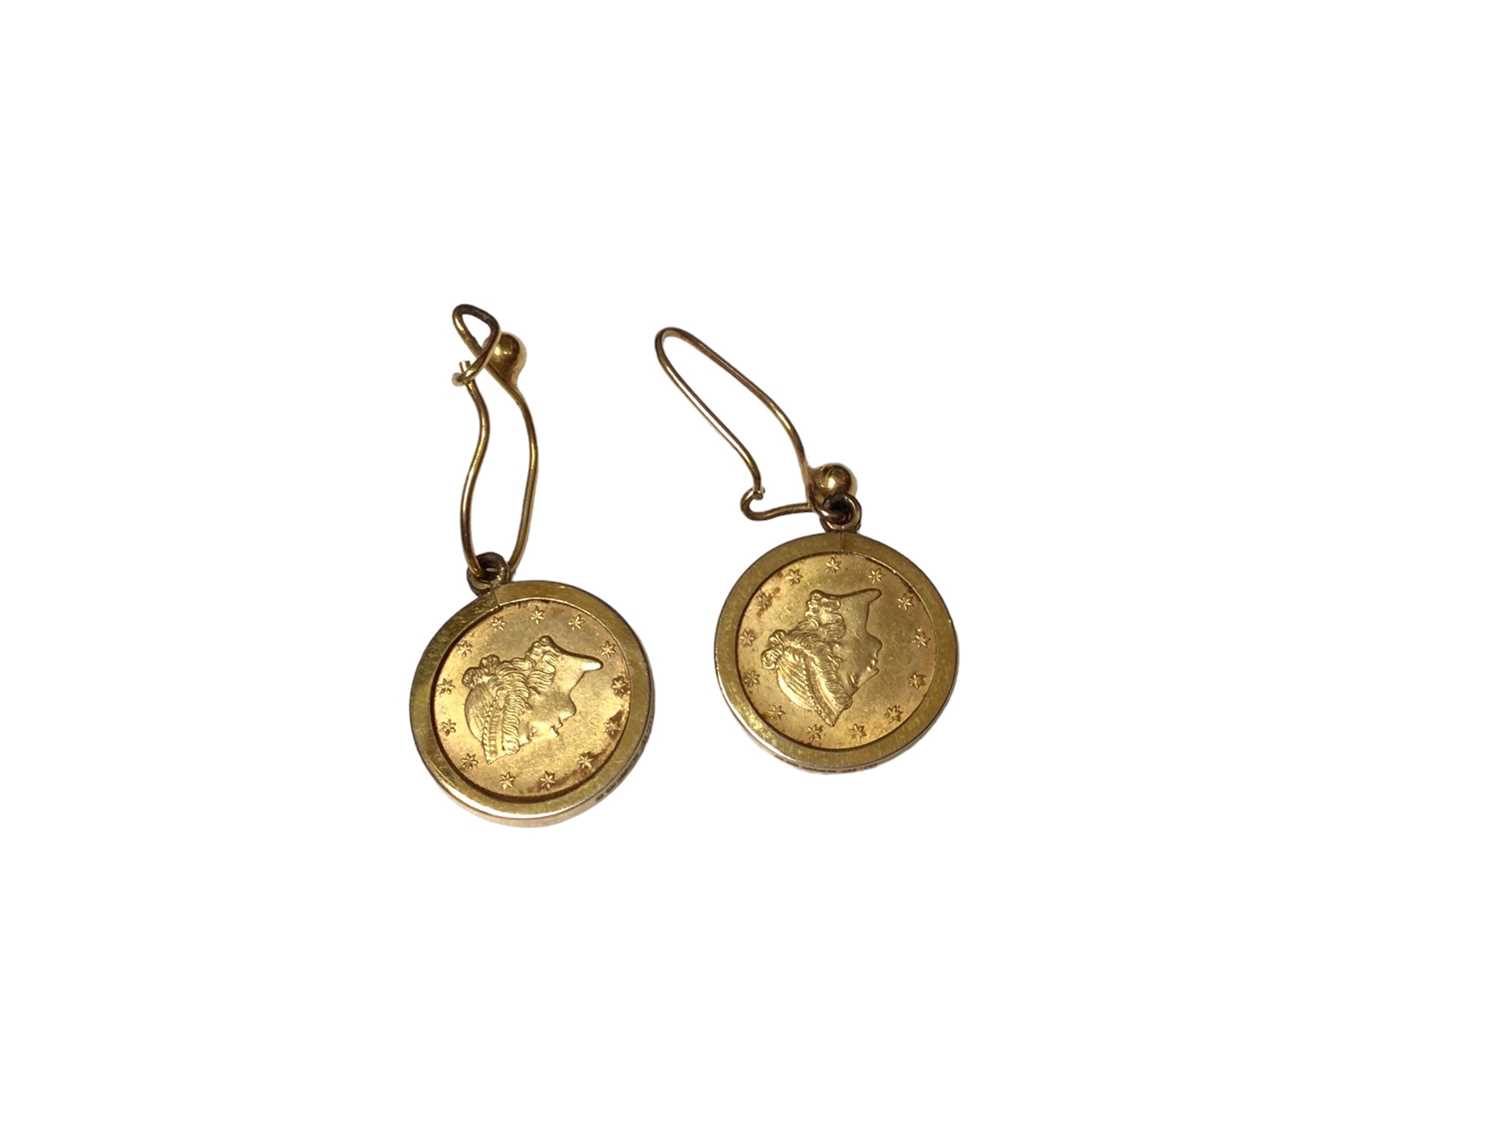 Pair of 19th century American 1 Dollar coins, 1853, in gold earring mounts - Image 2 of 2